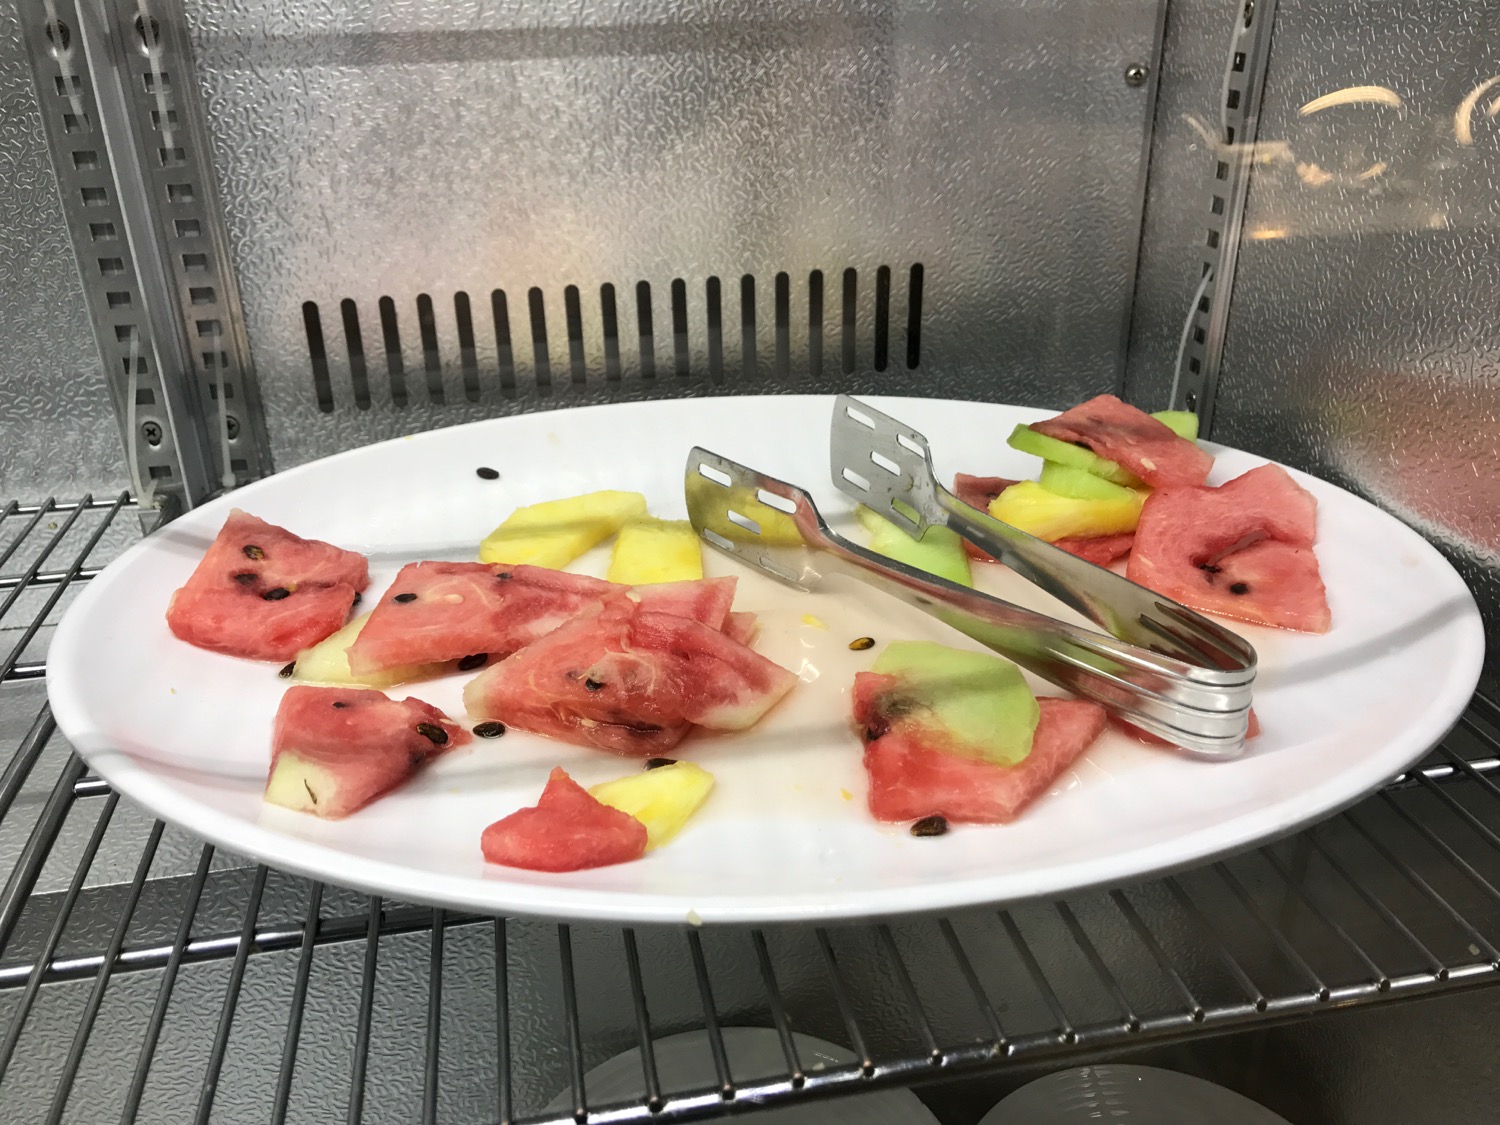 a plate of fruit and tongs